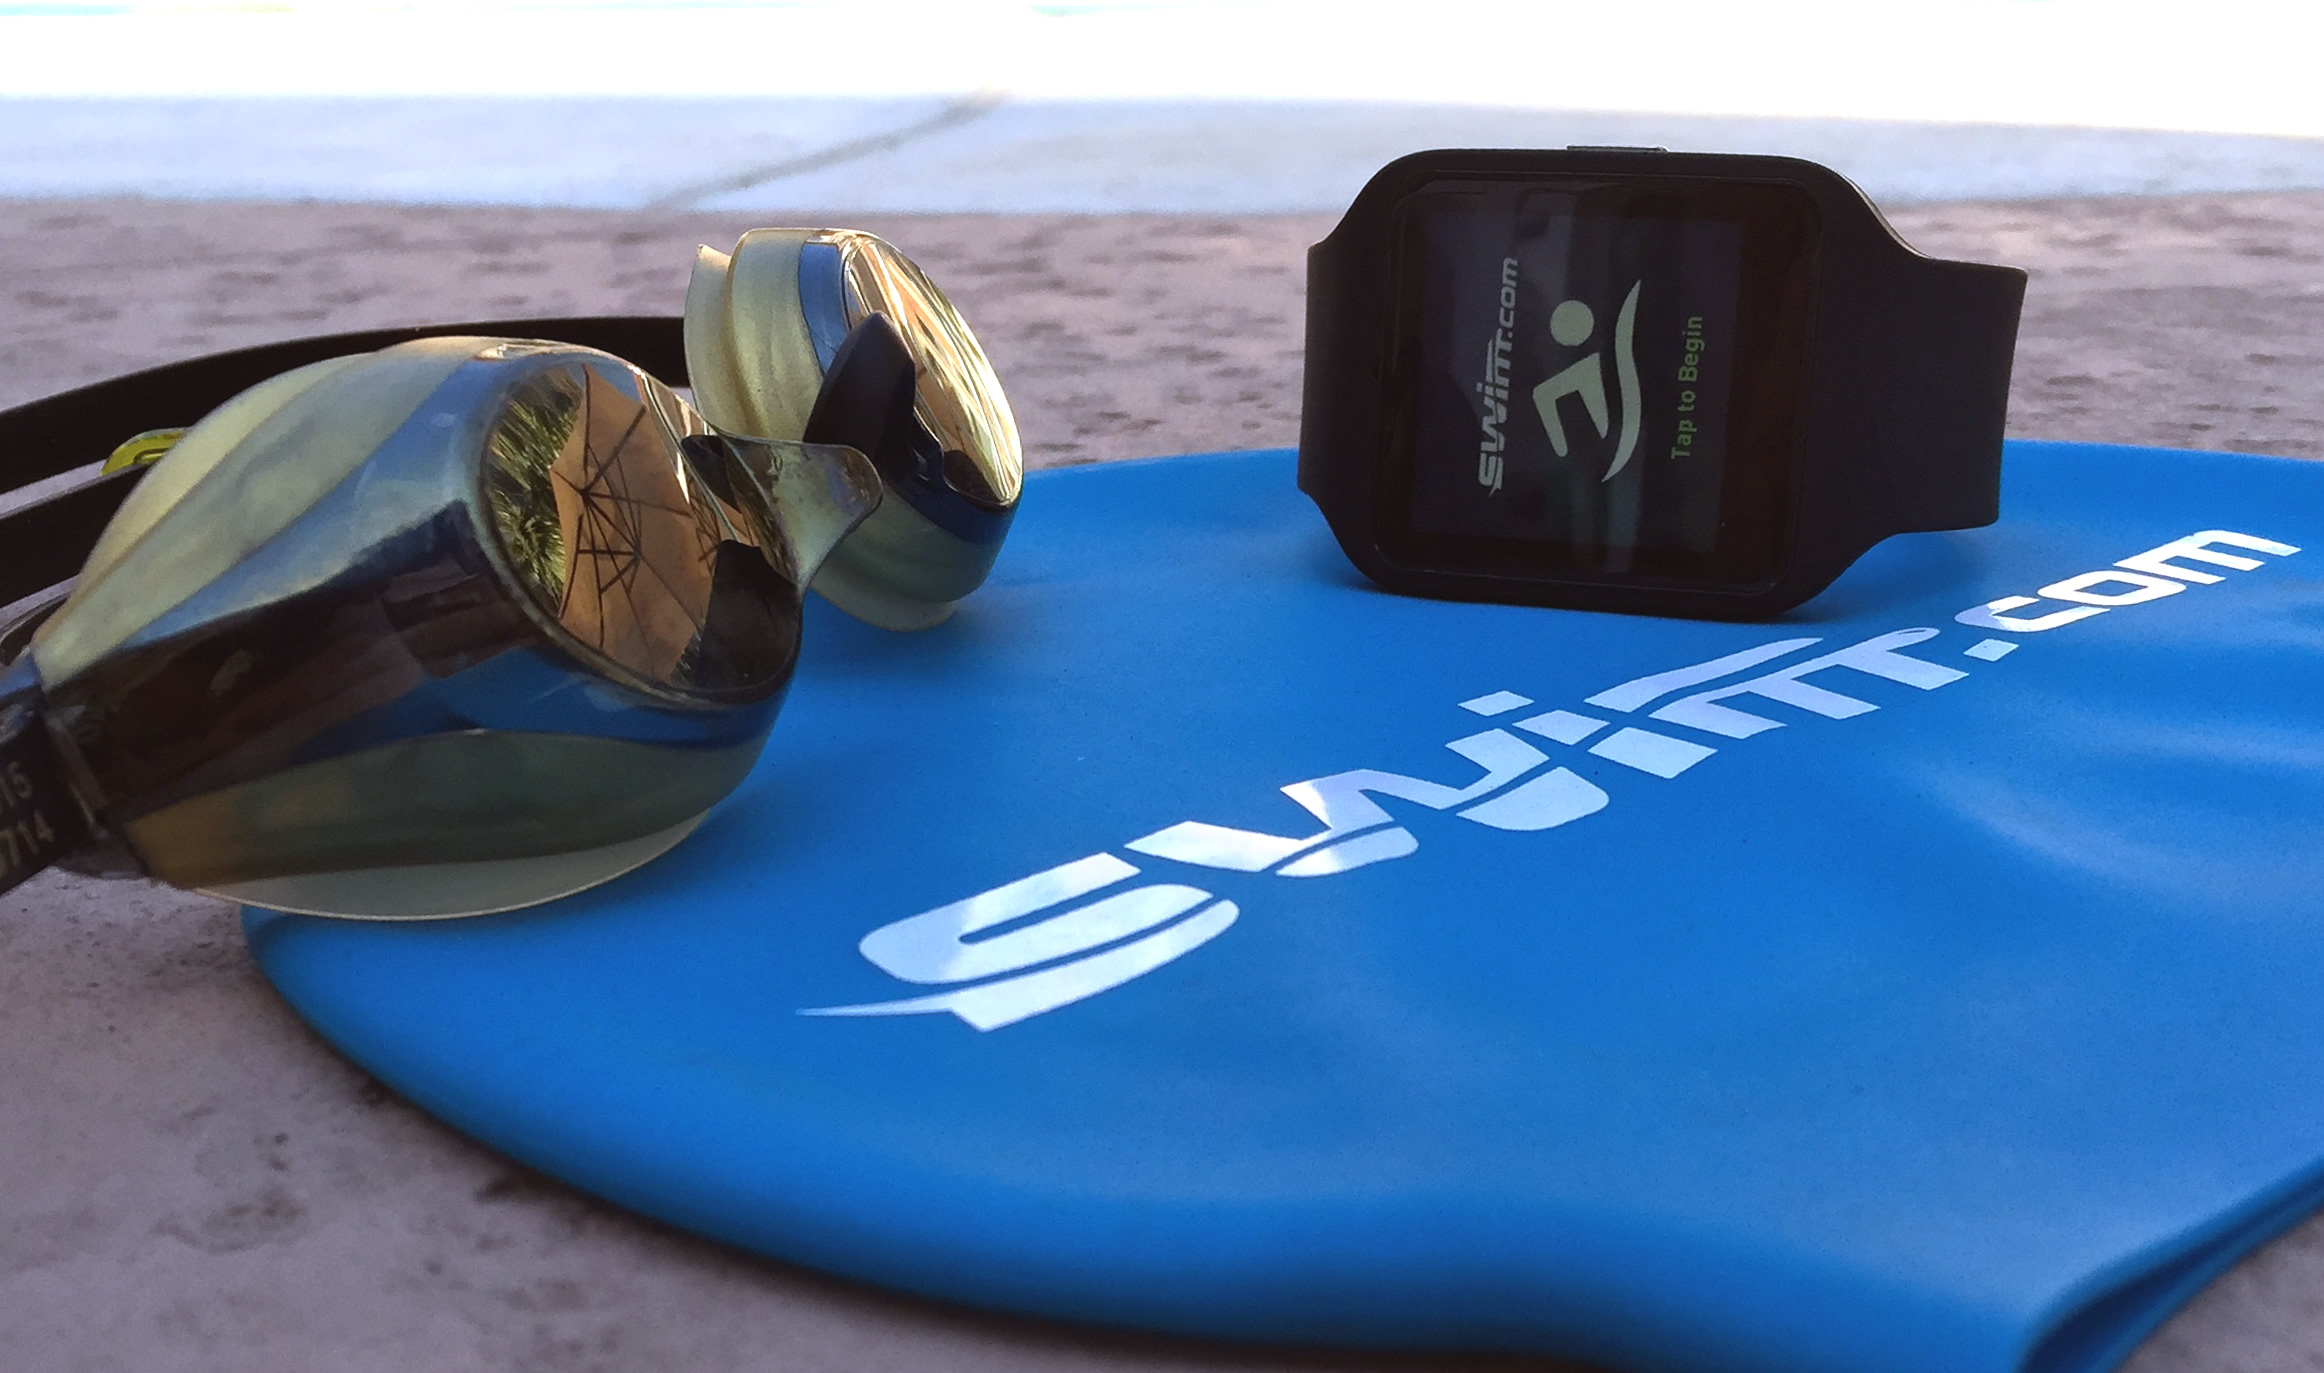 Swim.com Launches World’s First Swim Tracking App for Android Wear